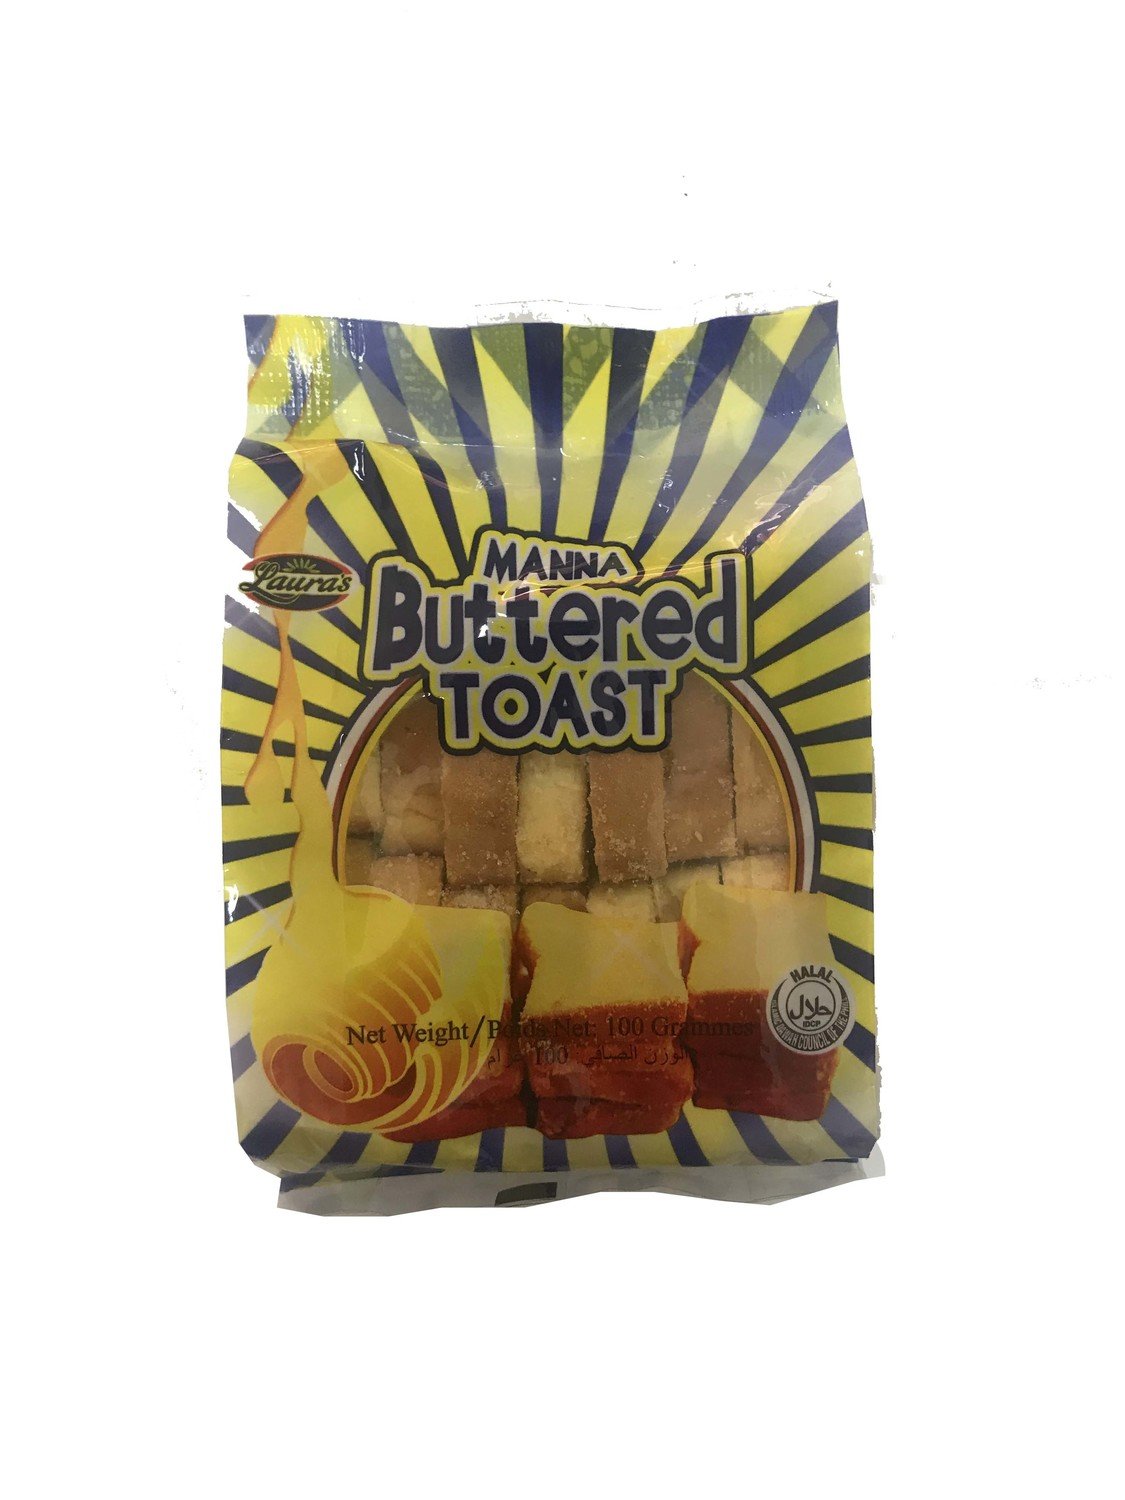 Laura's Manna Buttered Toast 100g